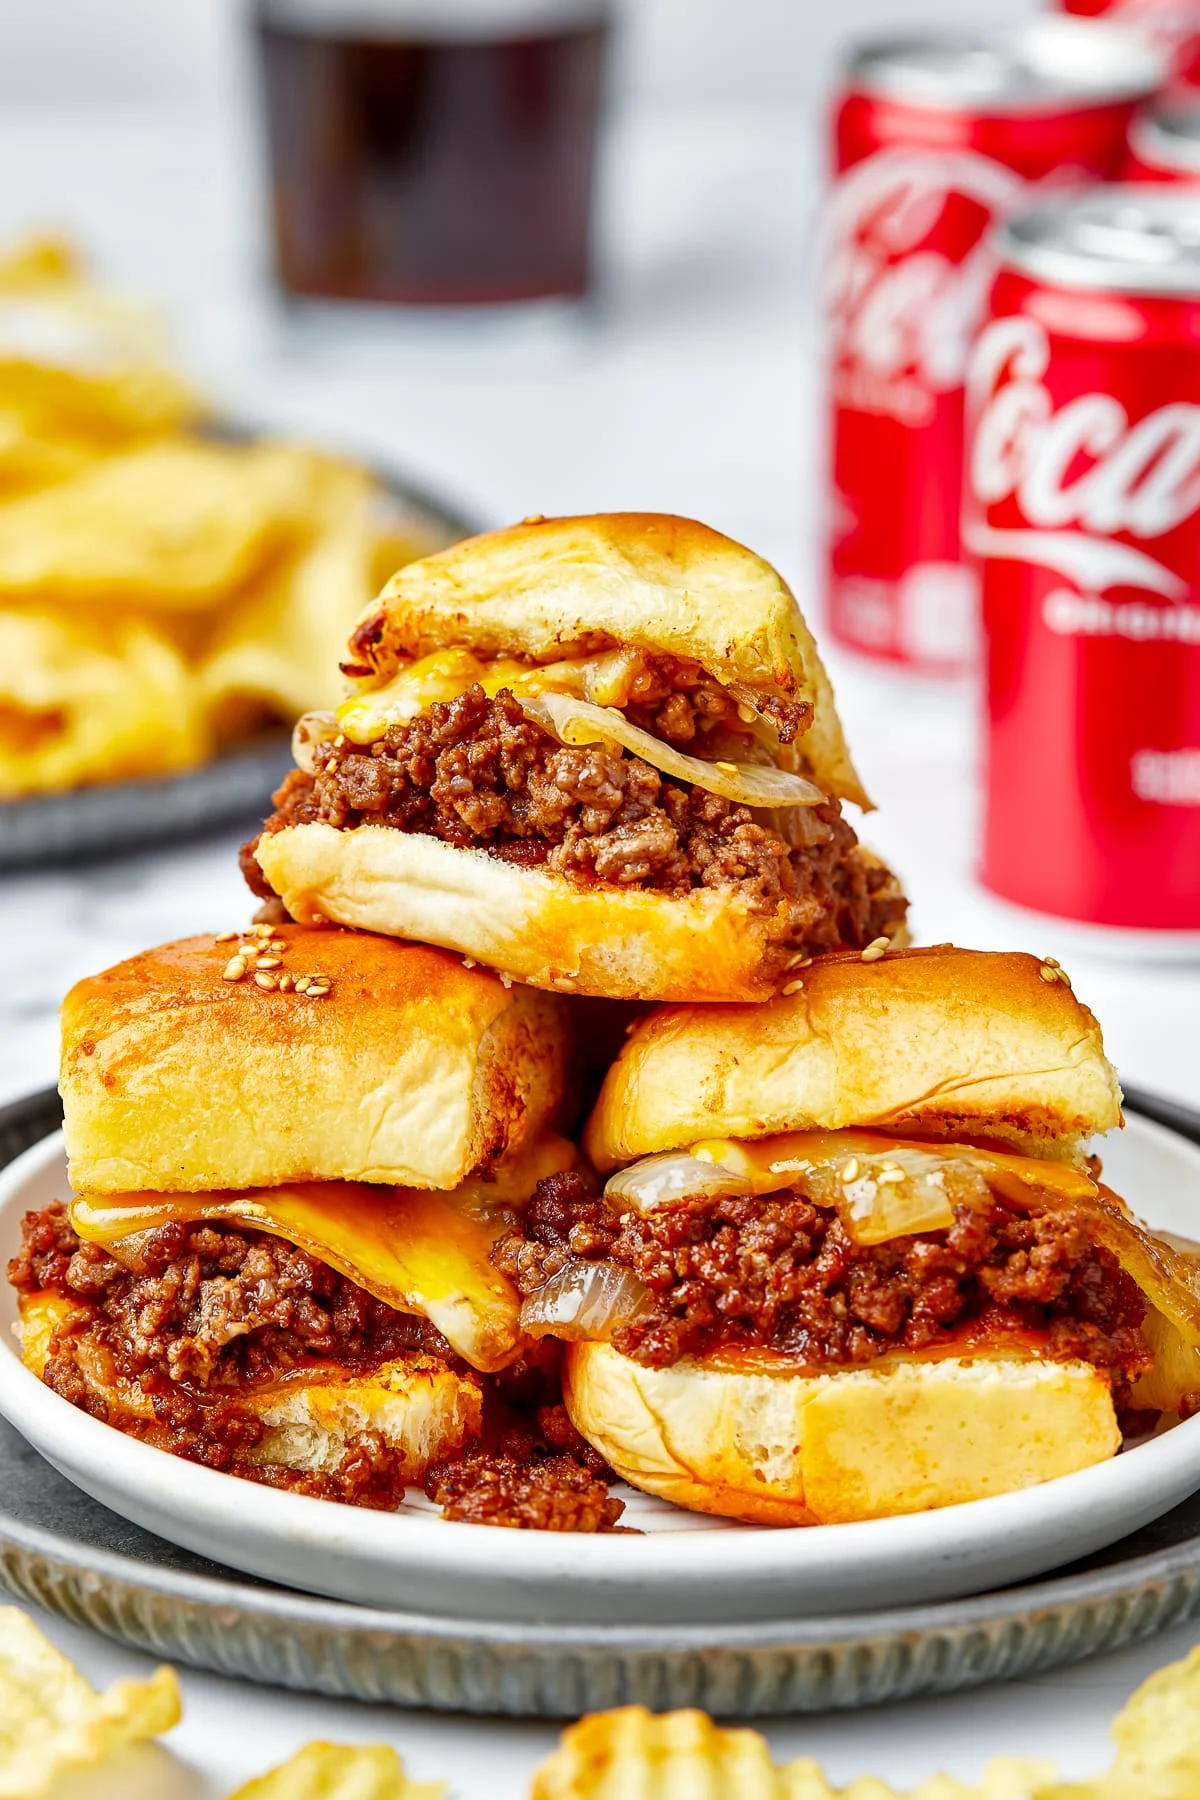 This photo shows 3 Sloppy Joe Sliders stacked on a plate. The Sliders are topped with melted cheddar cheese, served with potato chips and cans of Coke.